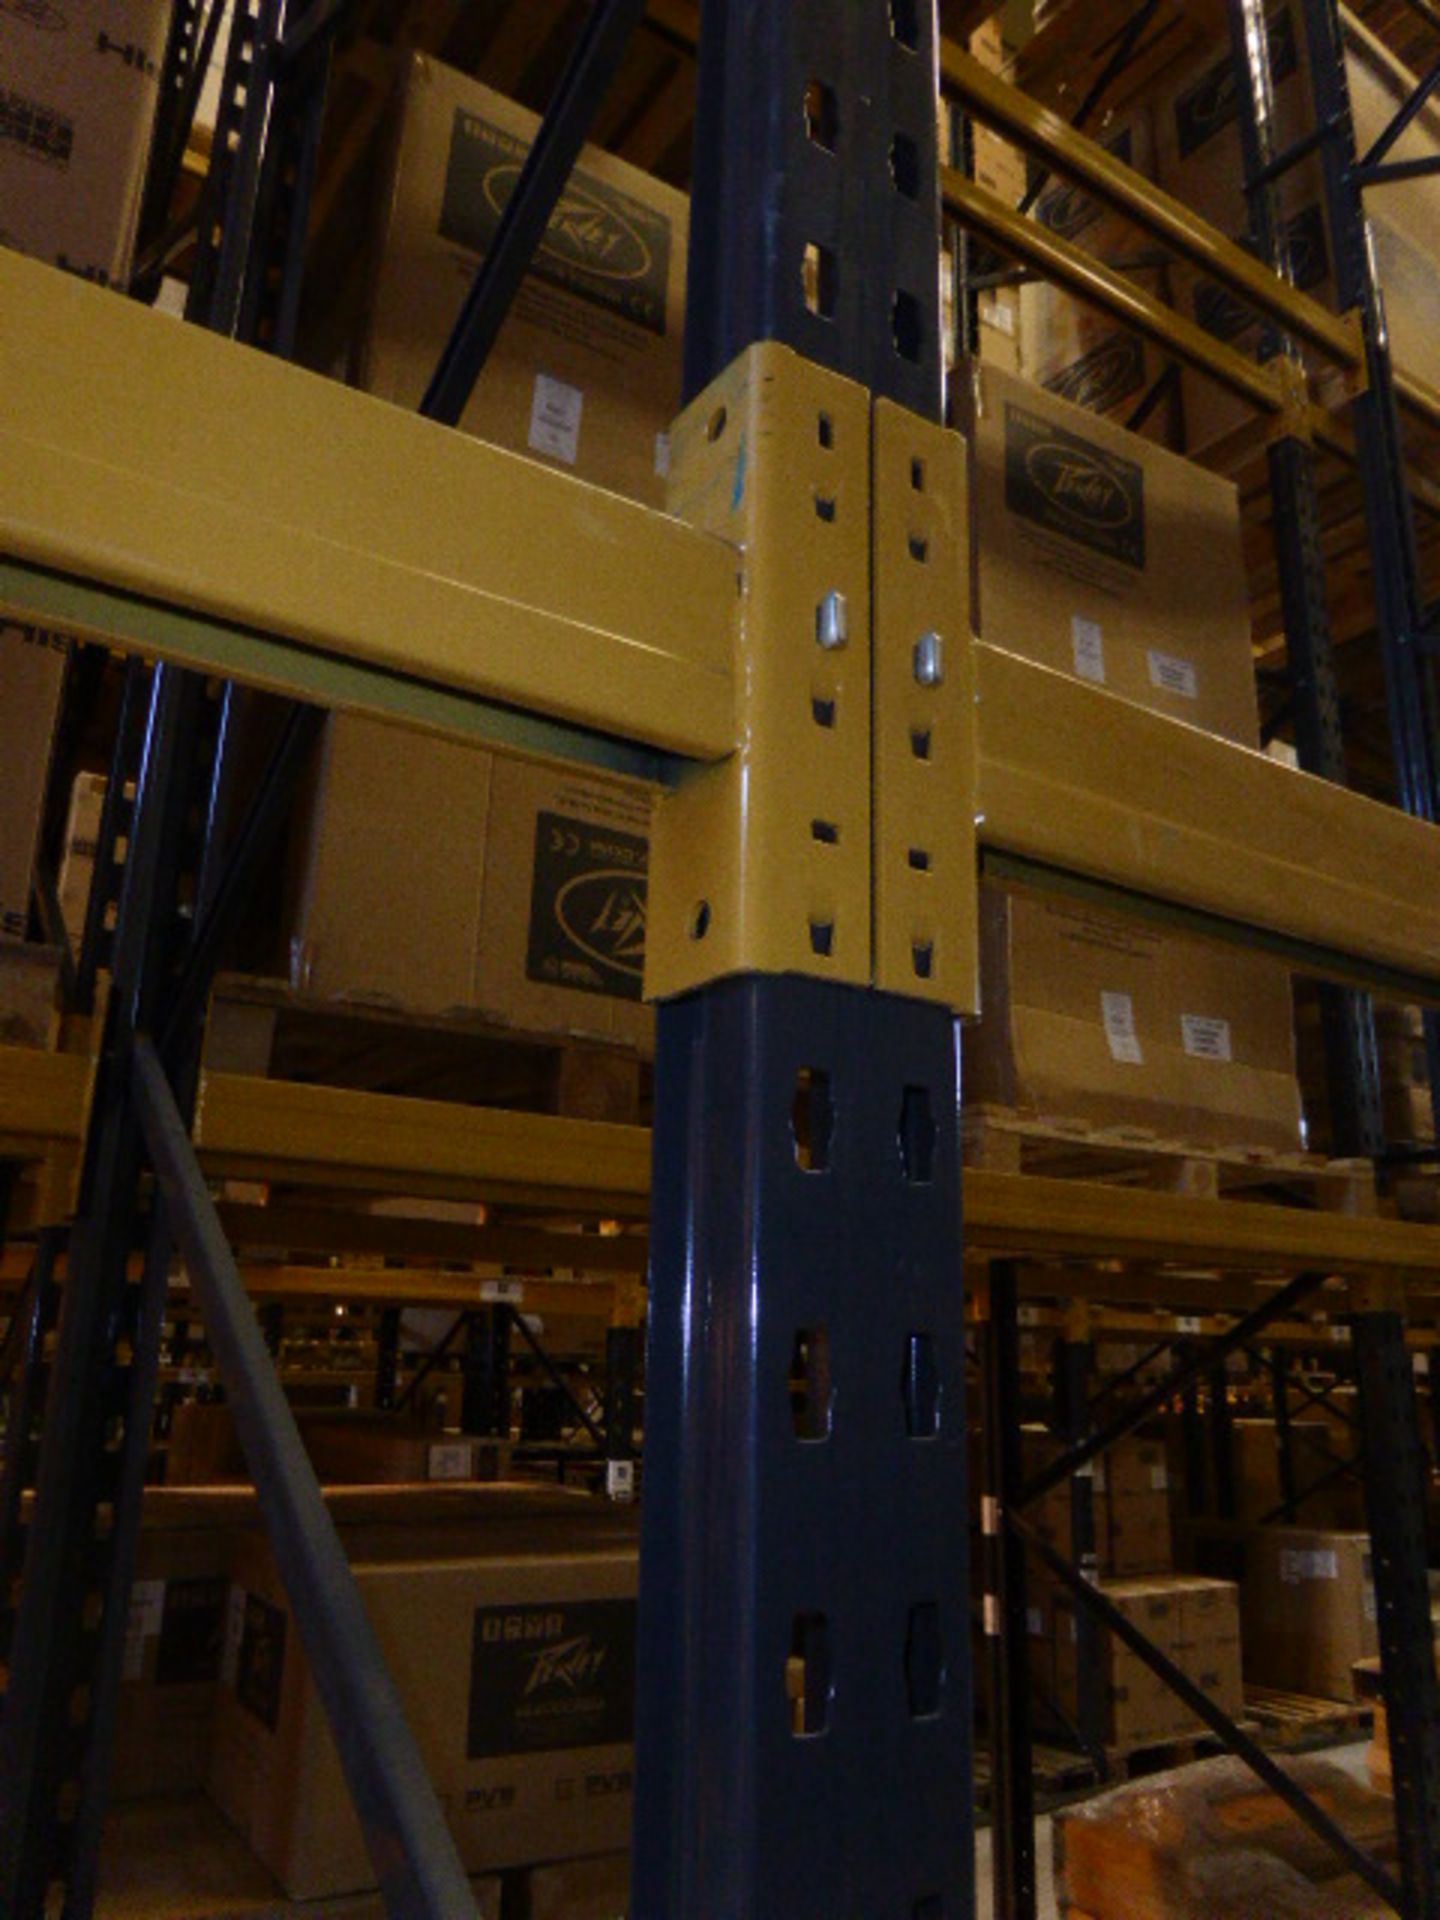 Link 51 model H pallet racking in the first warehouse in brown and yellow finish assembled in 20 - Image 4 of 9